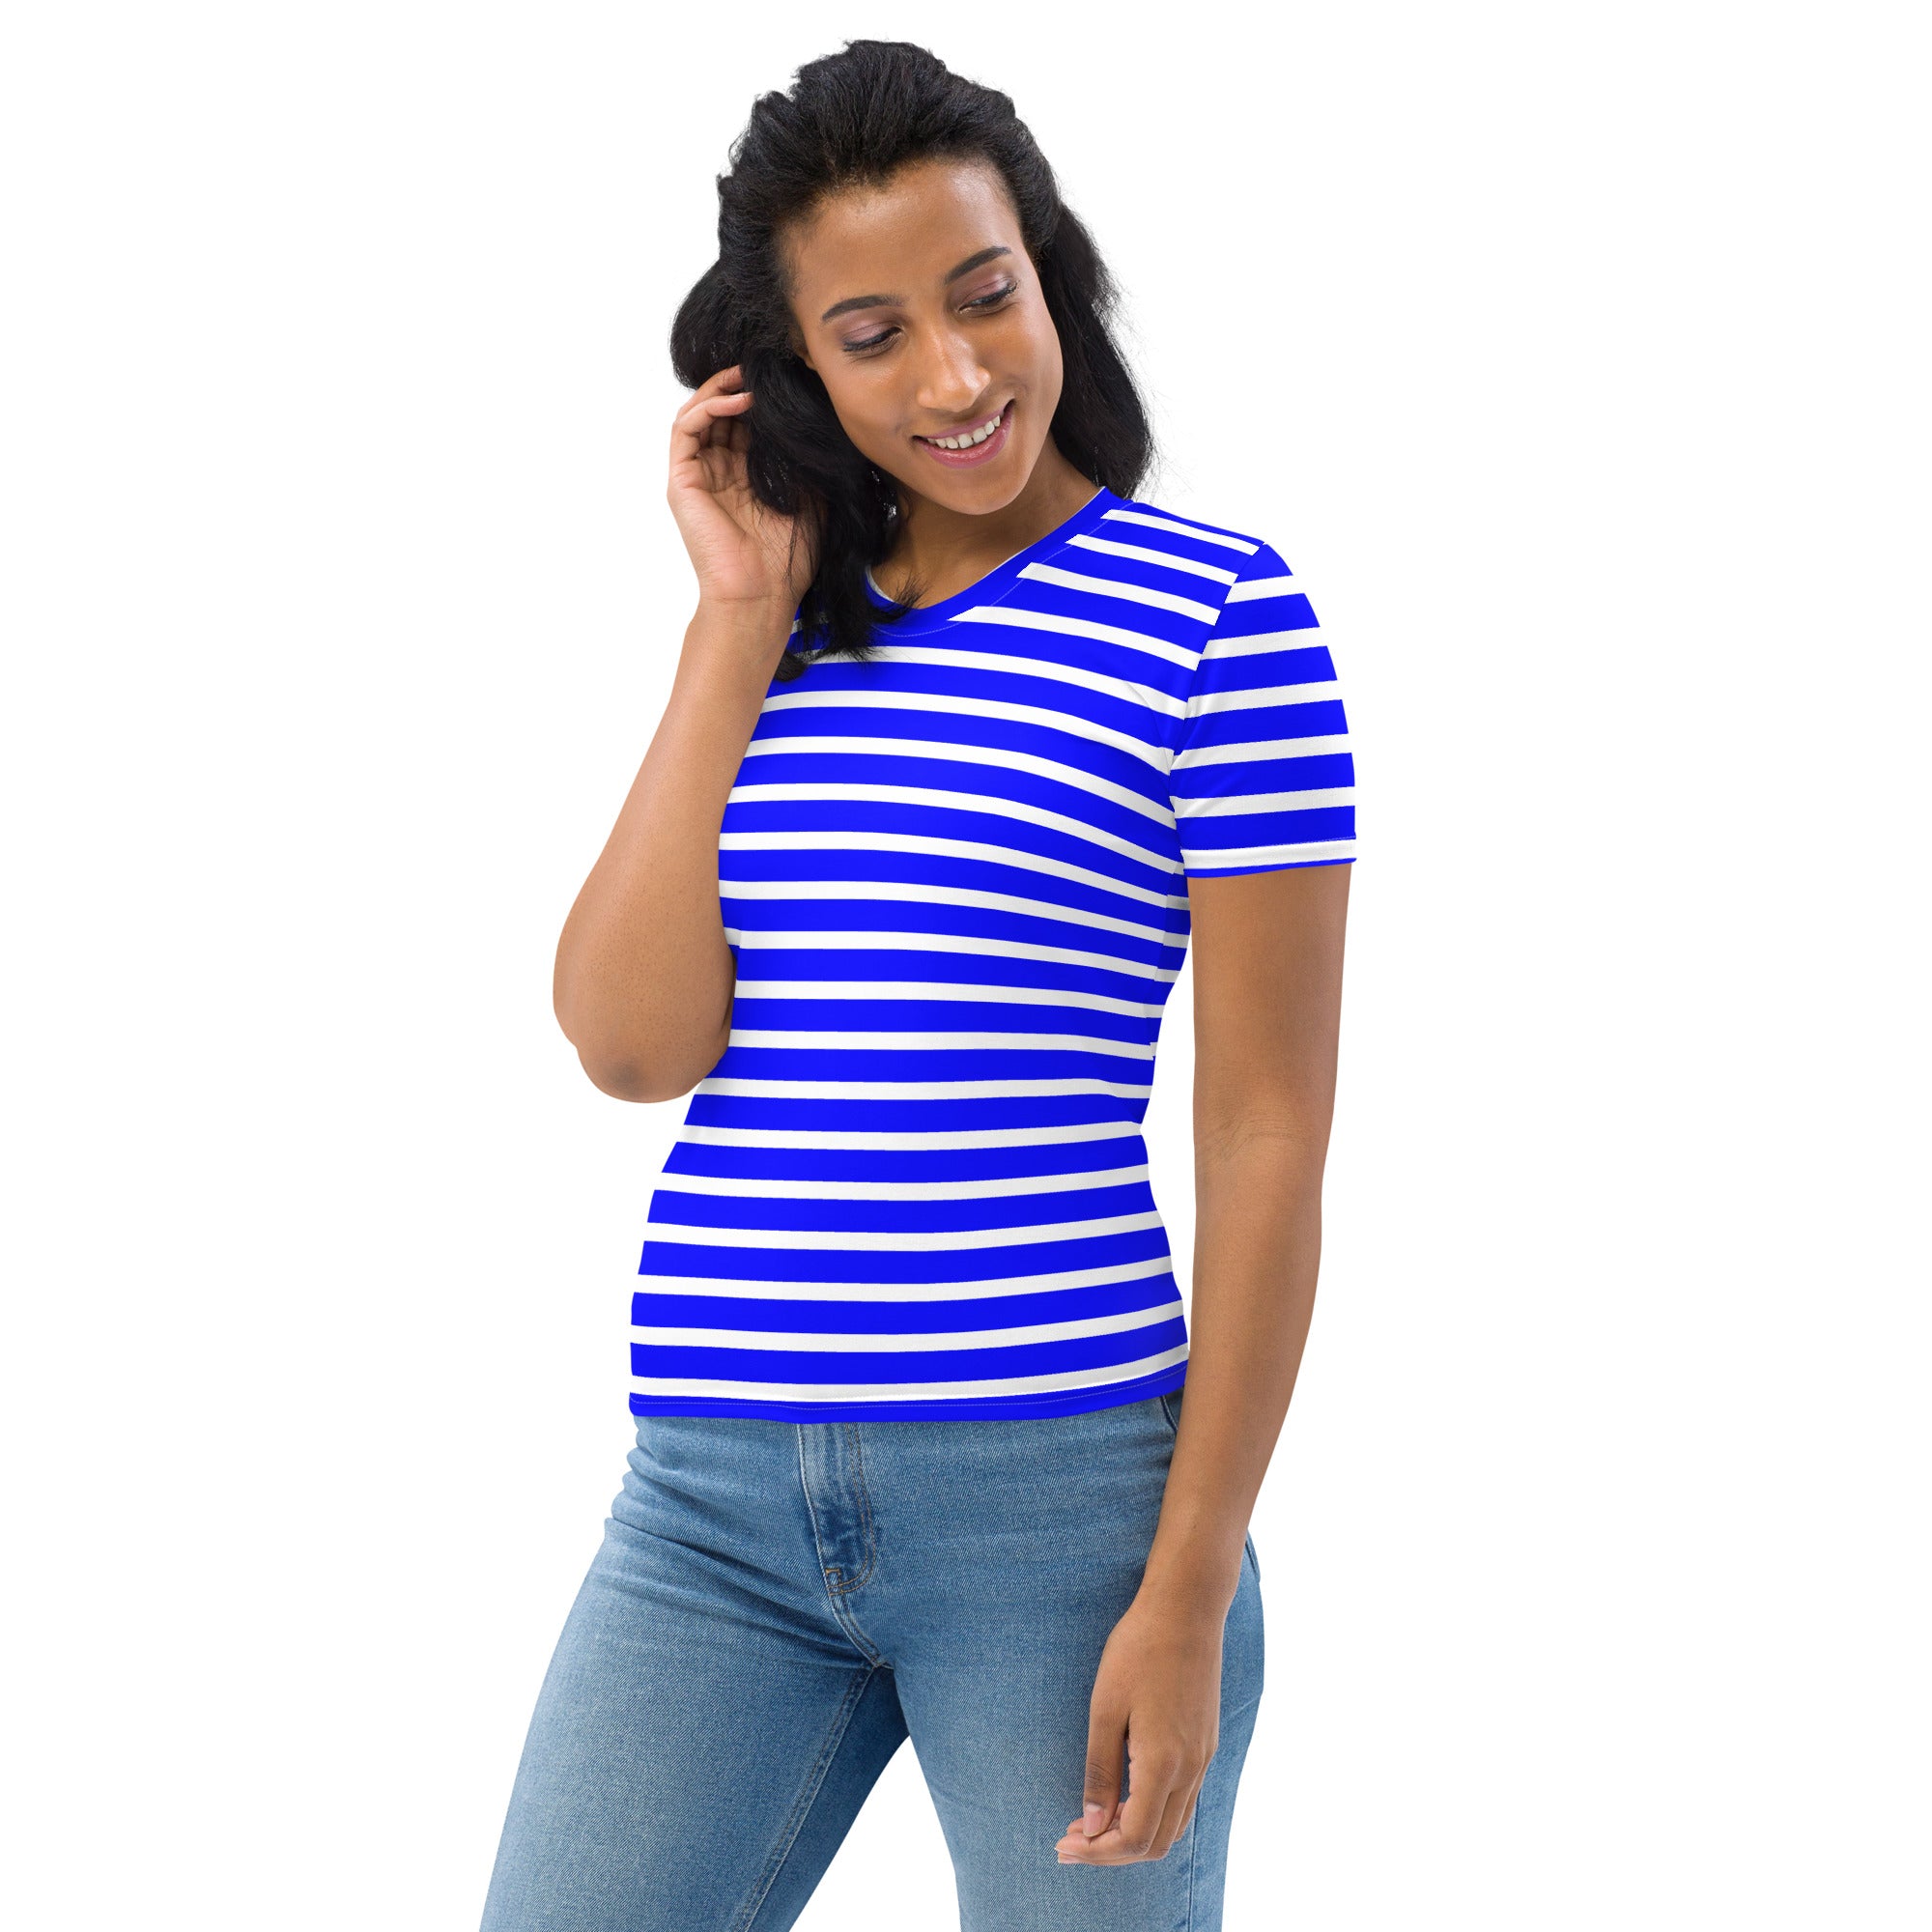 Women's T-shirt- White and Blue Striped